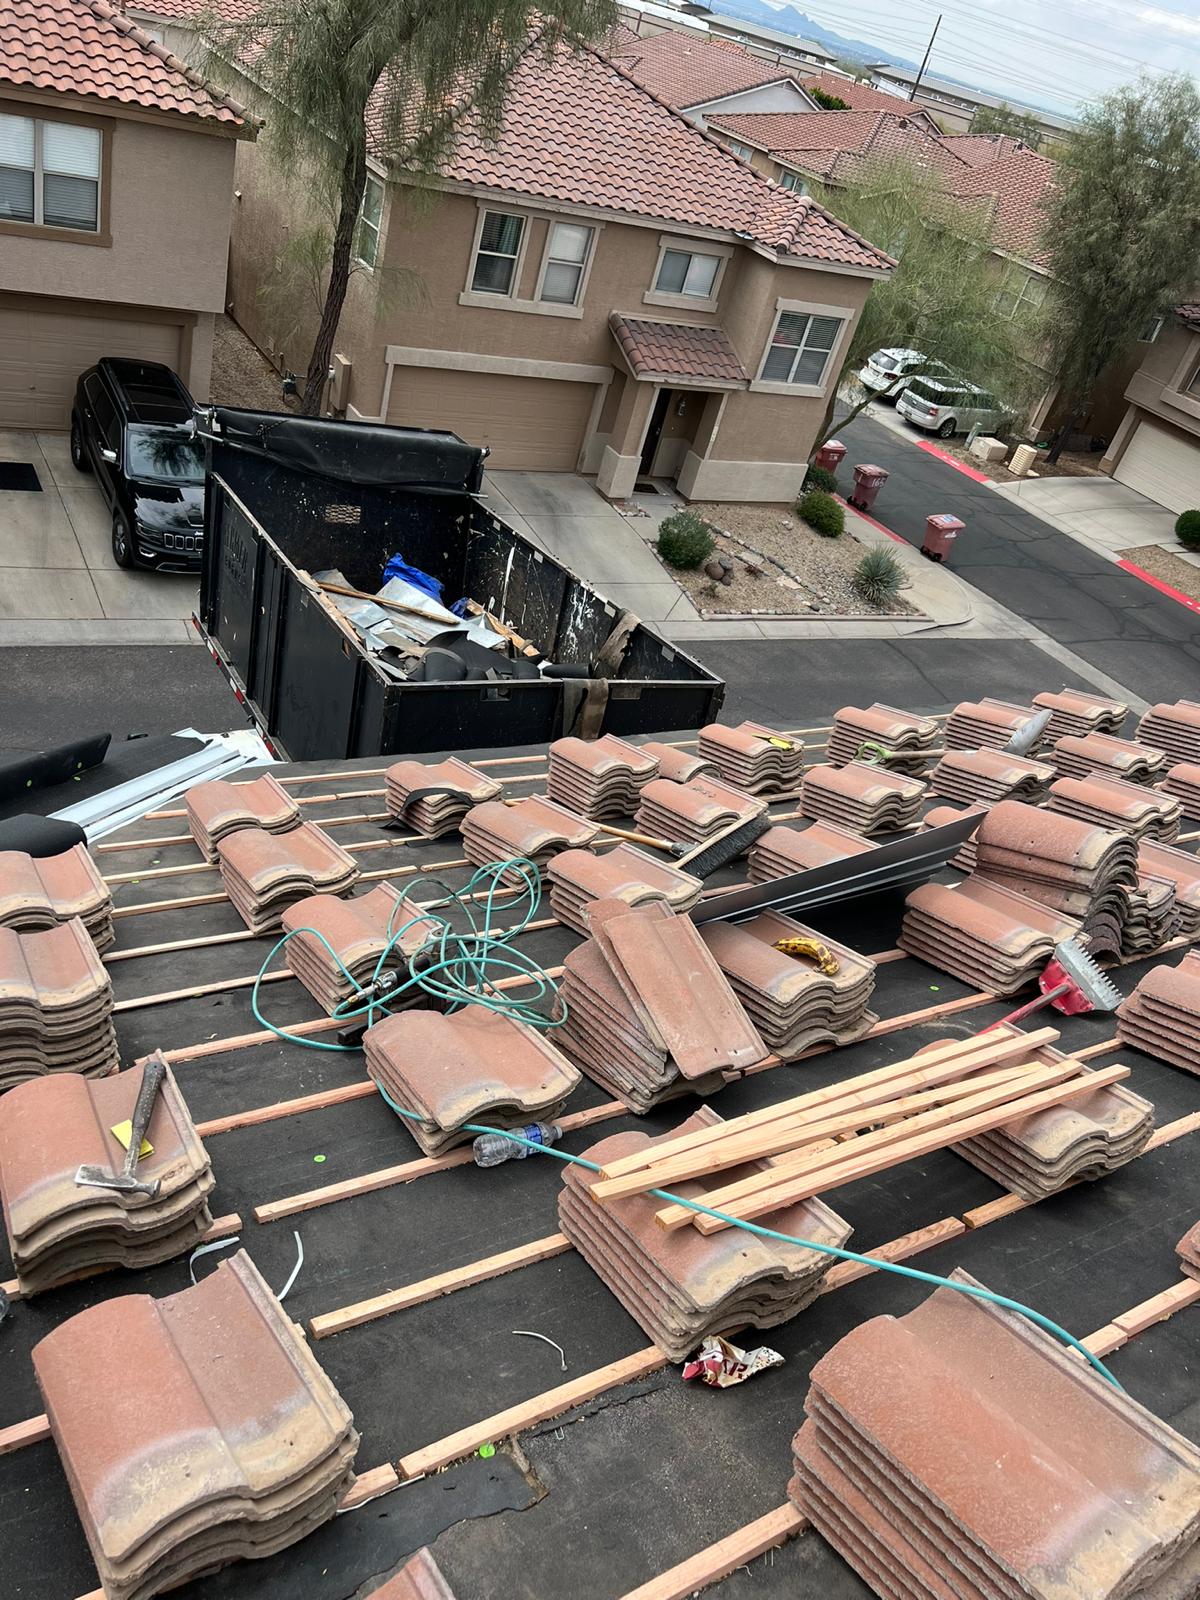 Collection of tile materials used in McCormick Ranch for roof leak repairs.